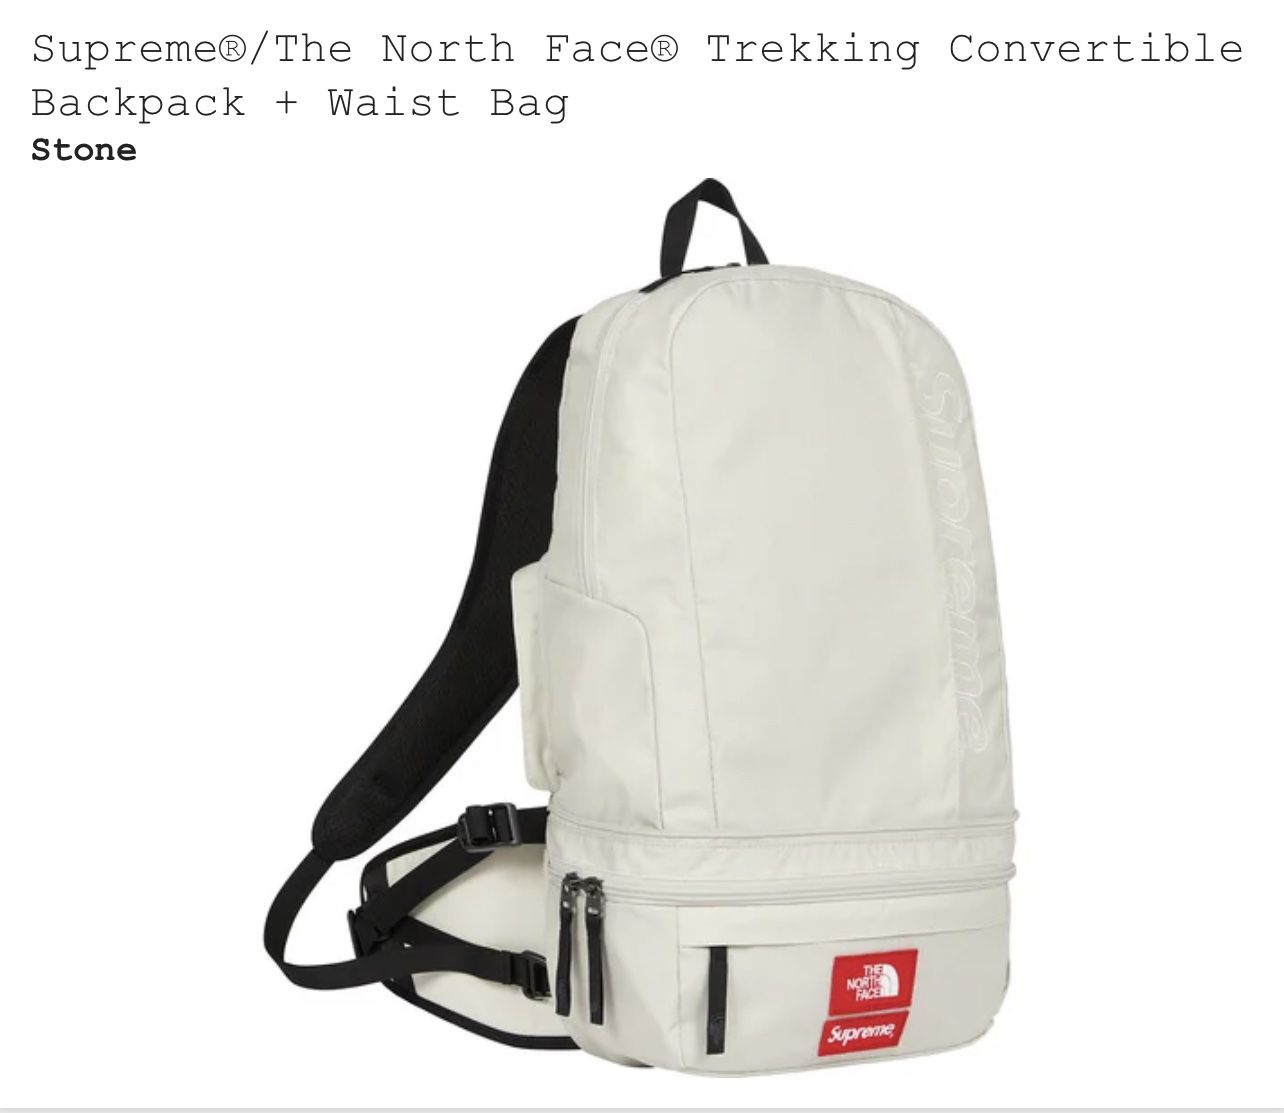 Supreme The North Face Trekking Convertible Backpack Waist Bag